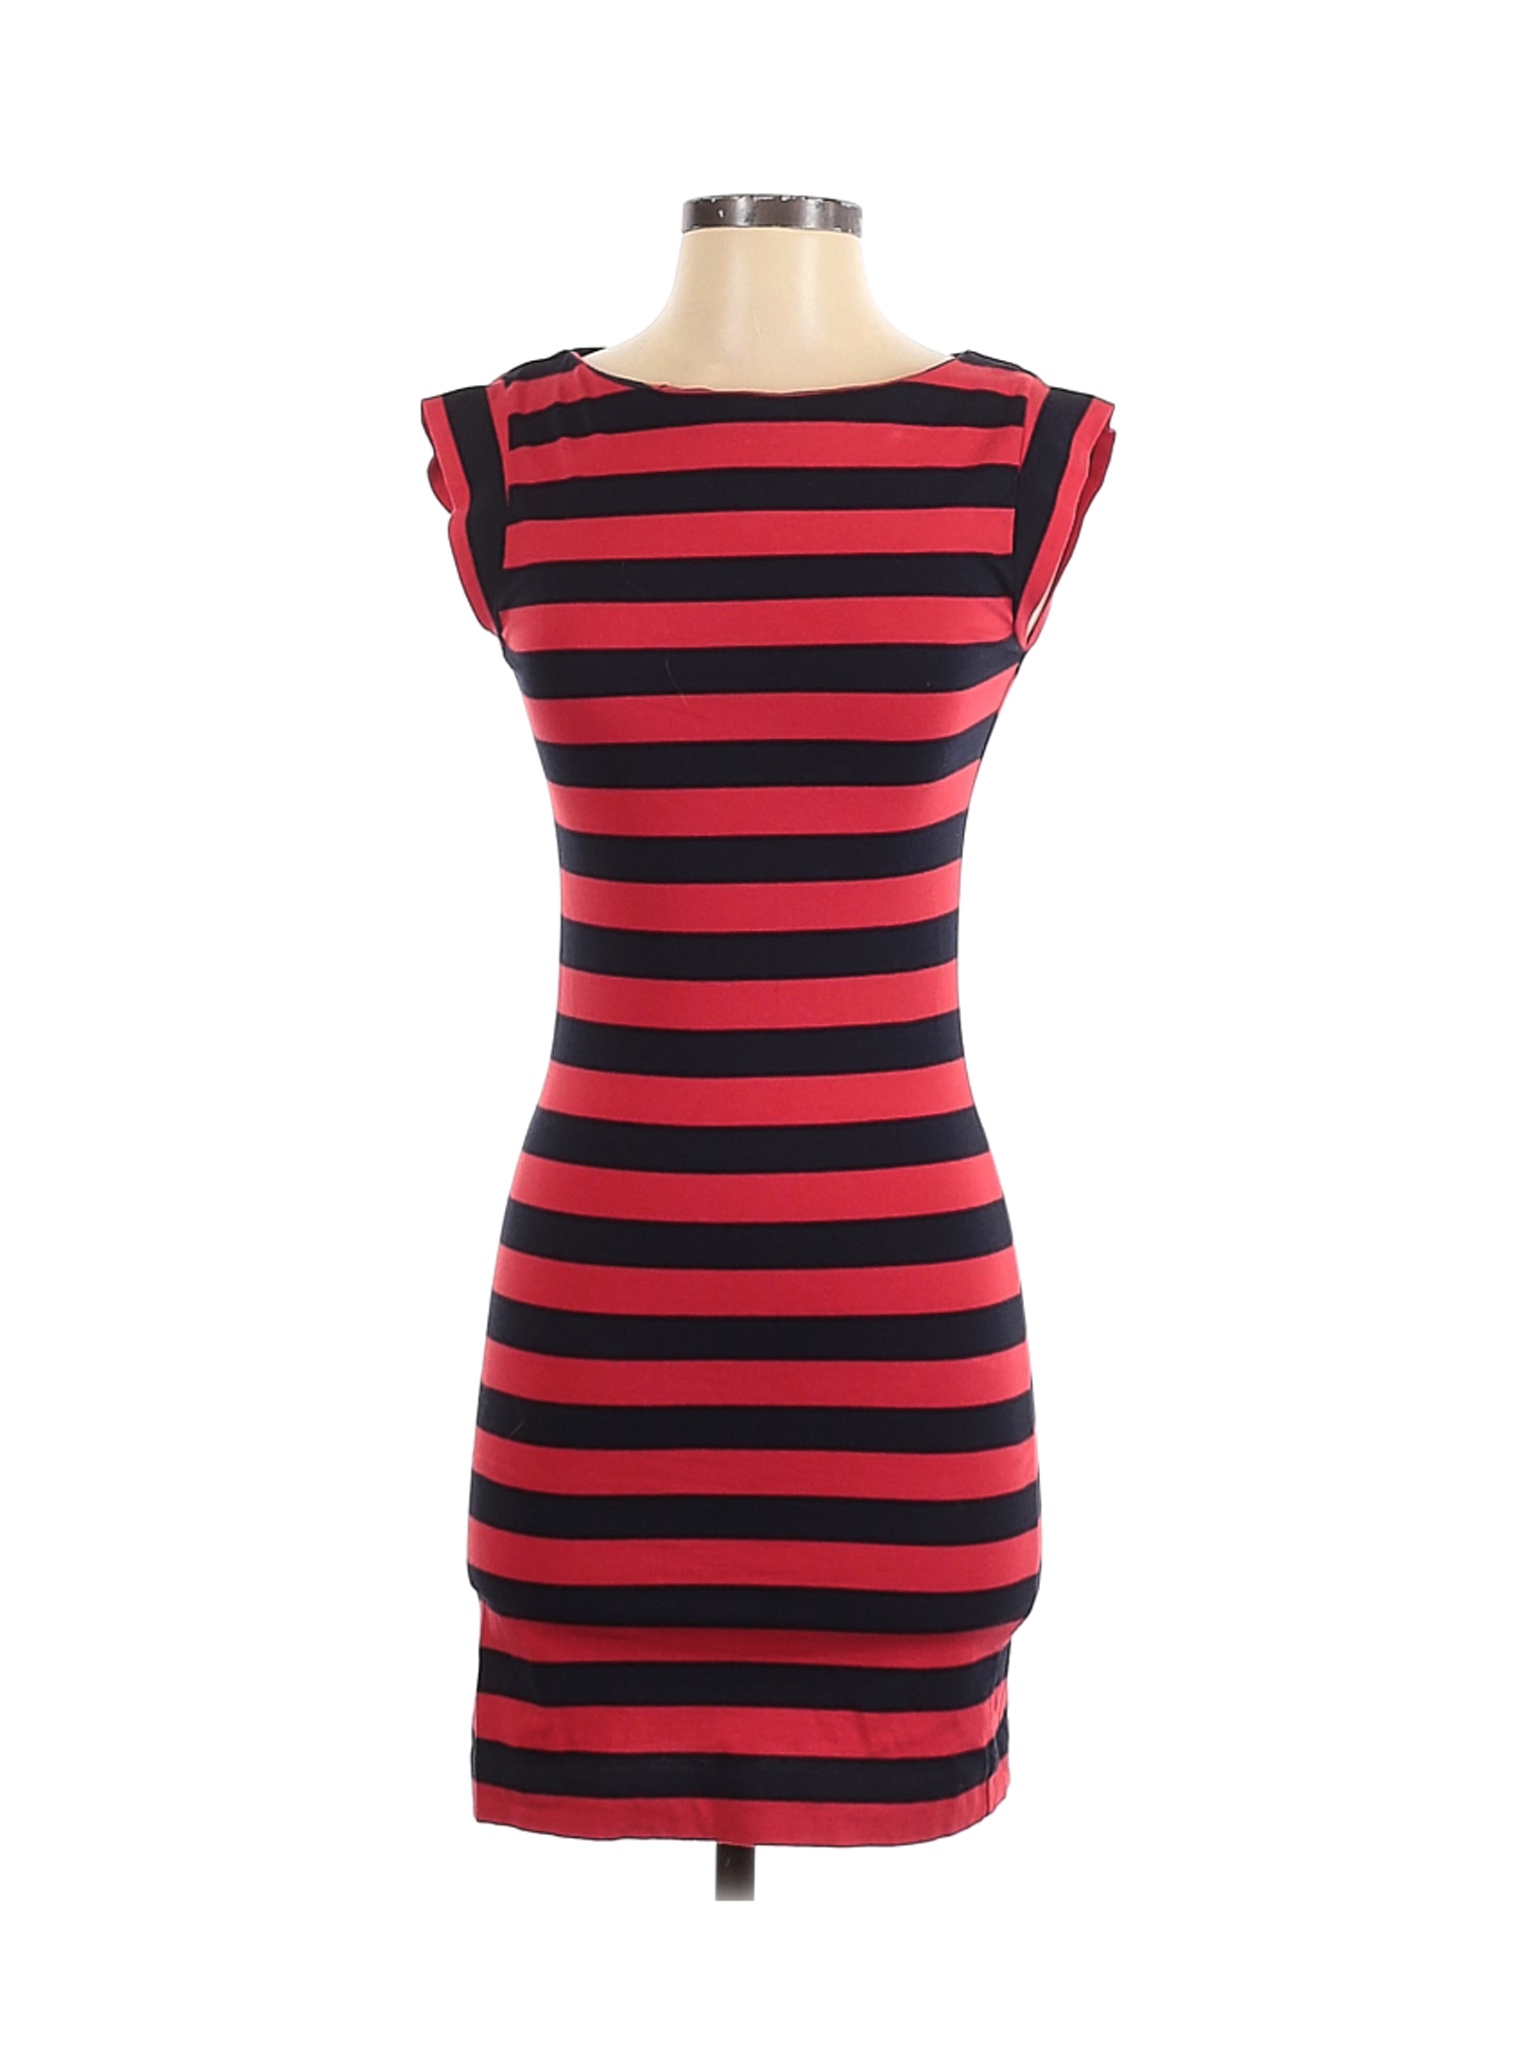 French Connection Women Red Casual Dress 4 | eBay